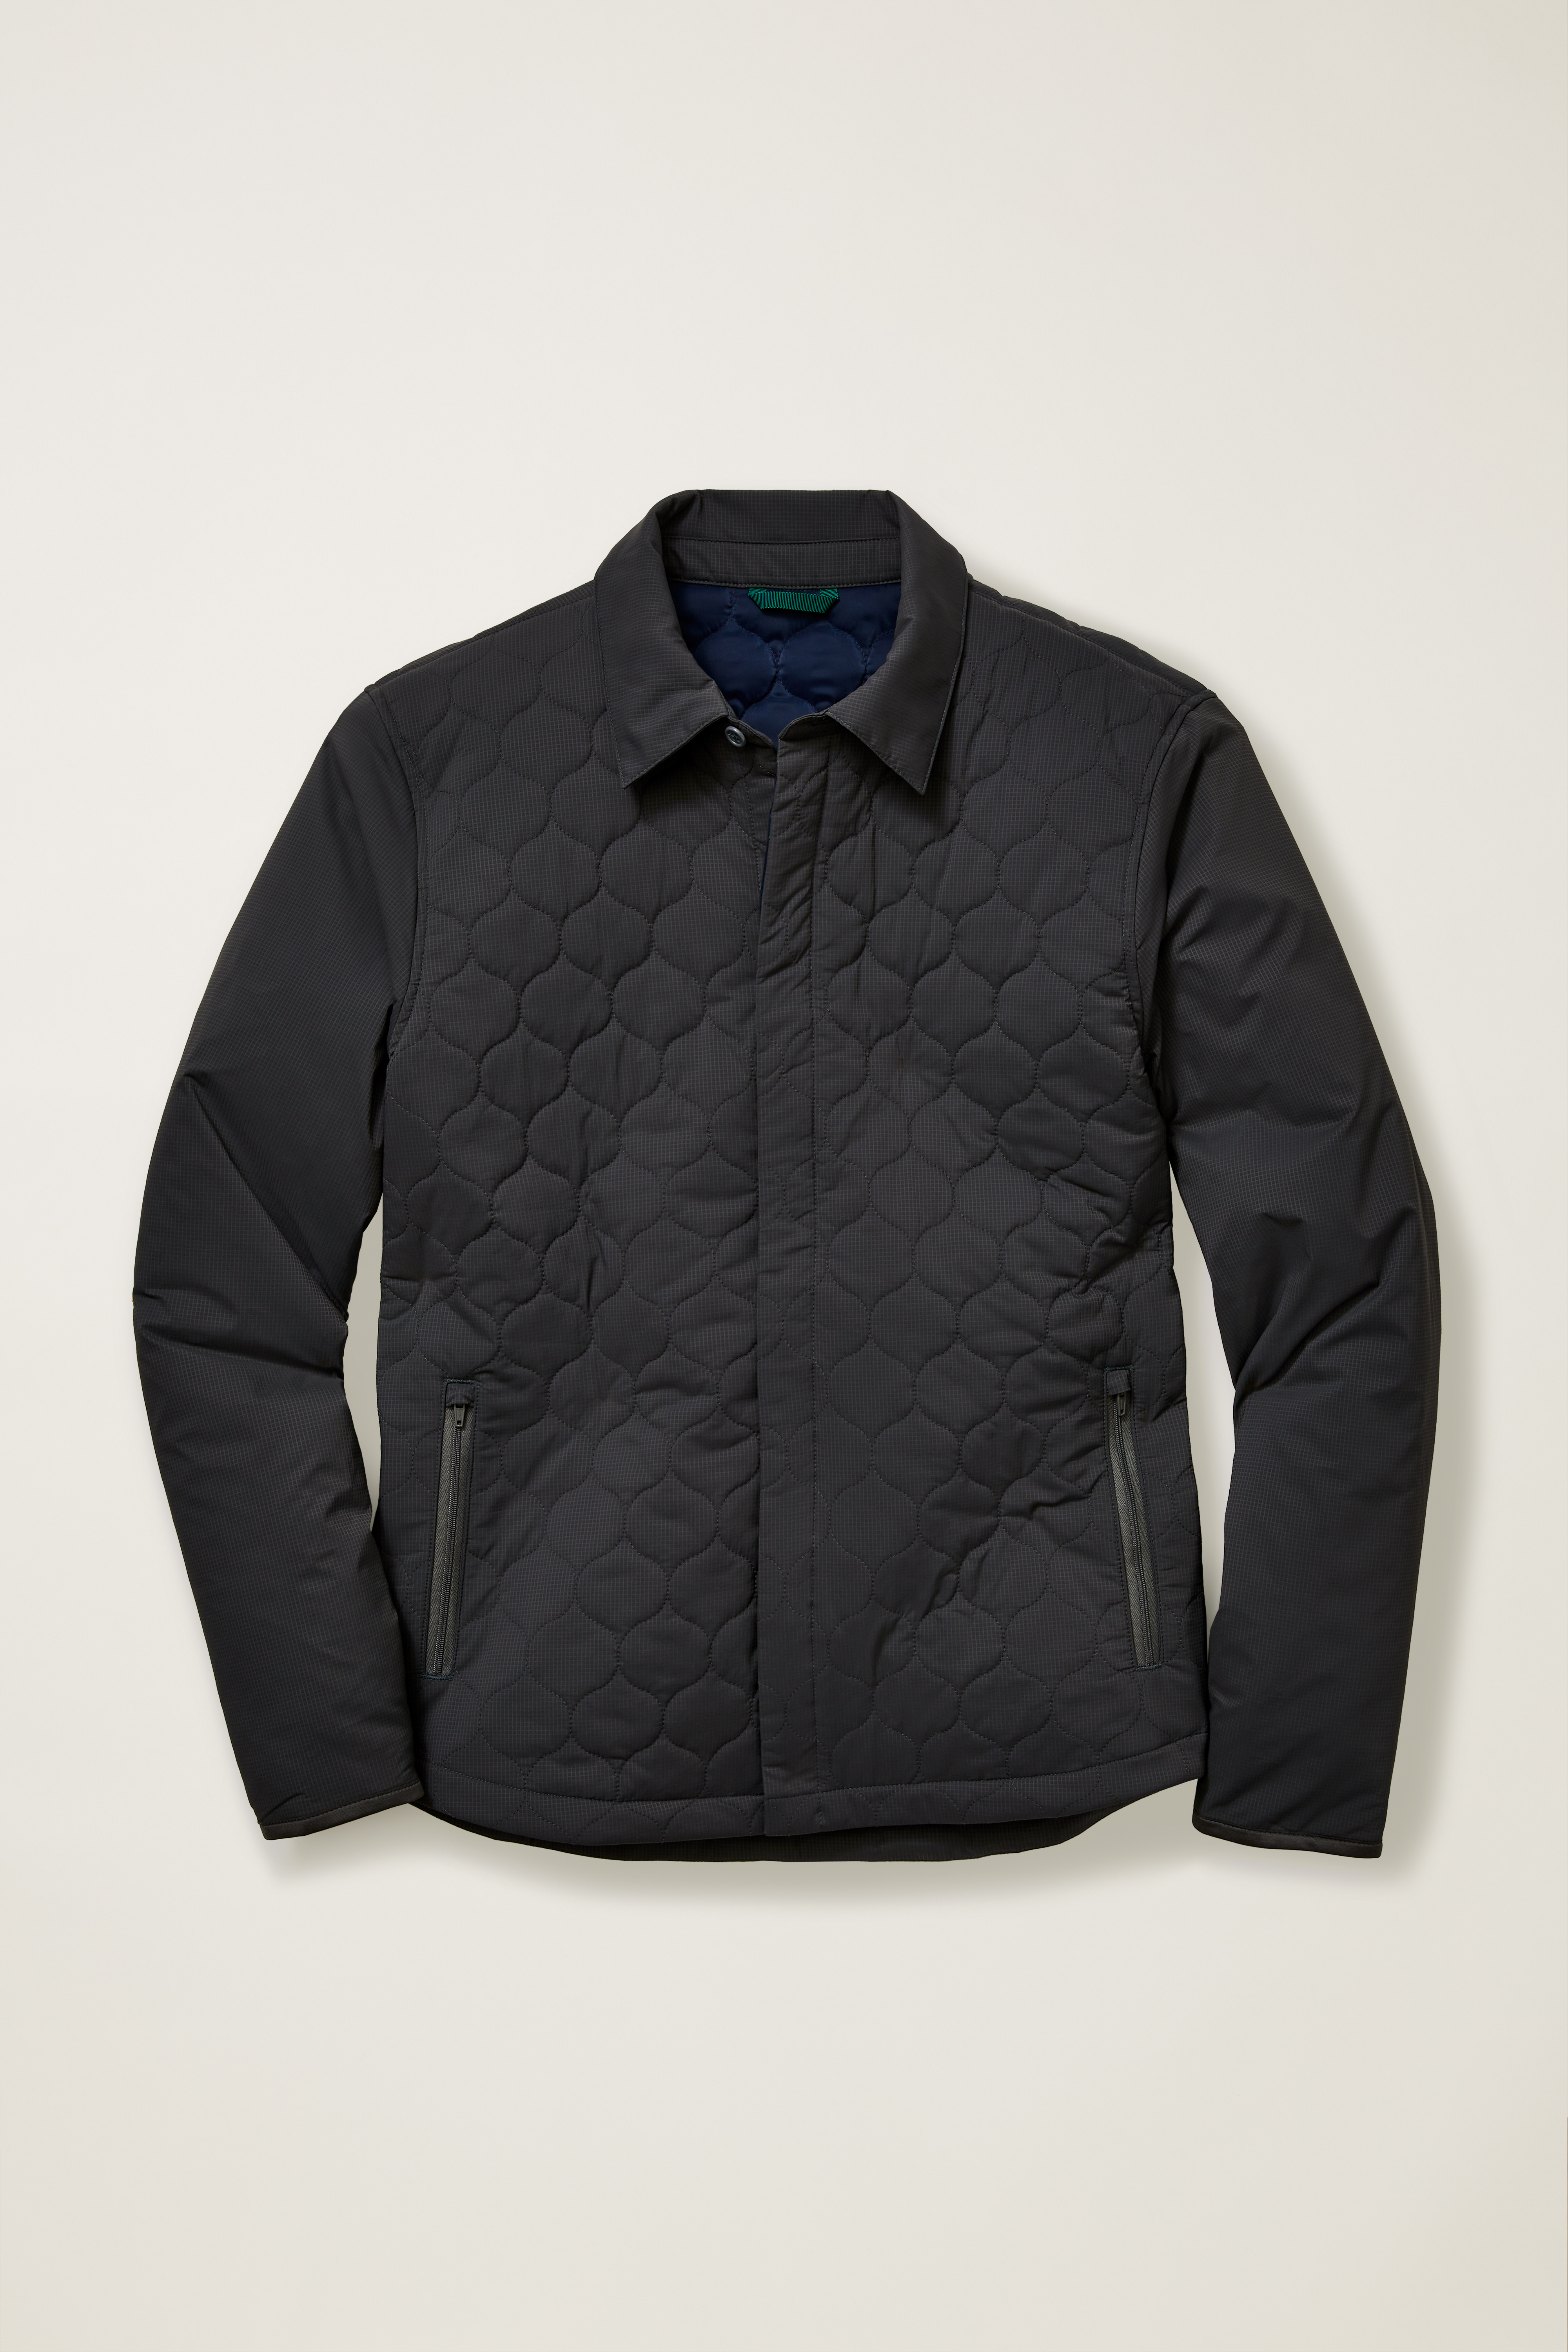 The Quilted Clubhouse Jacket